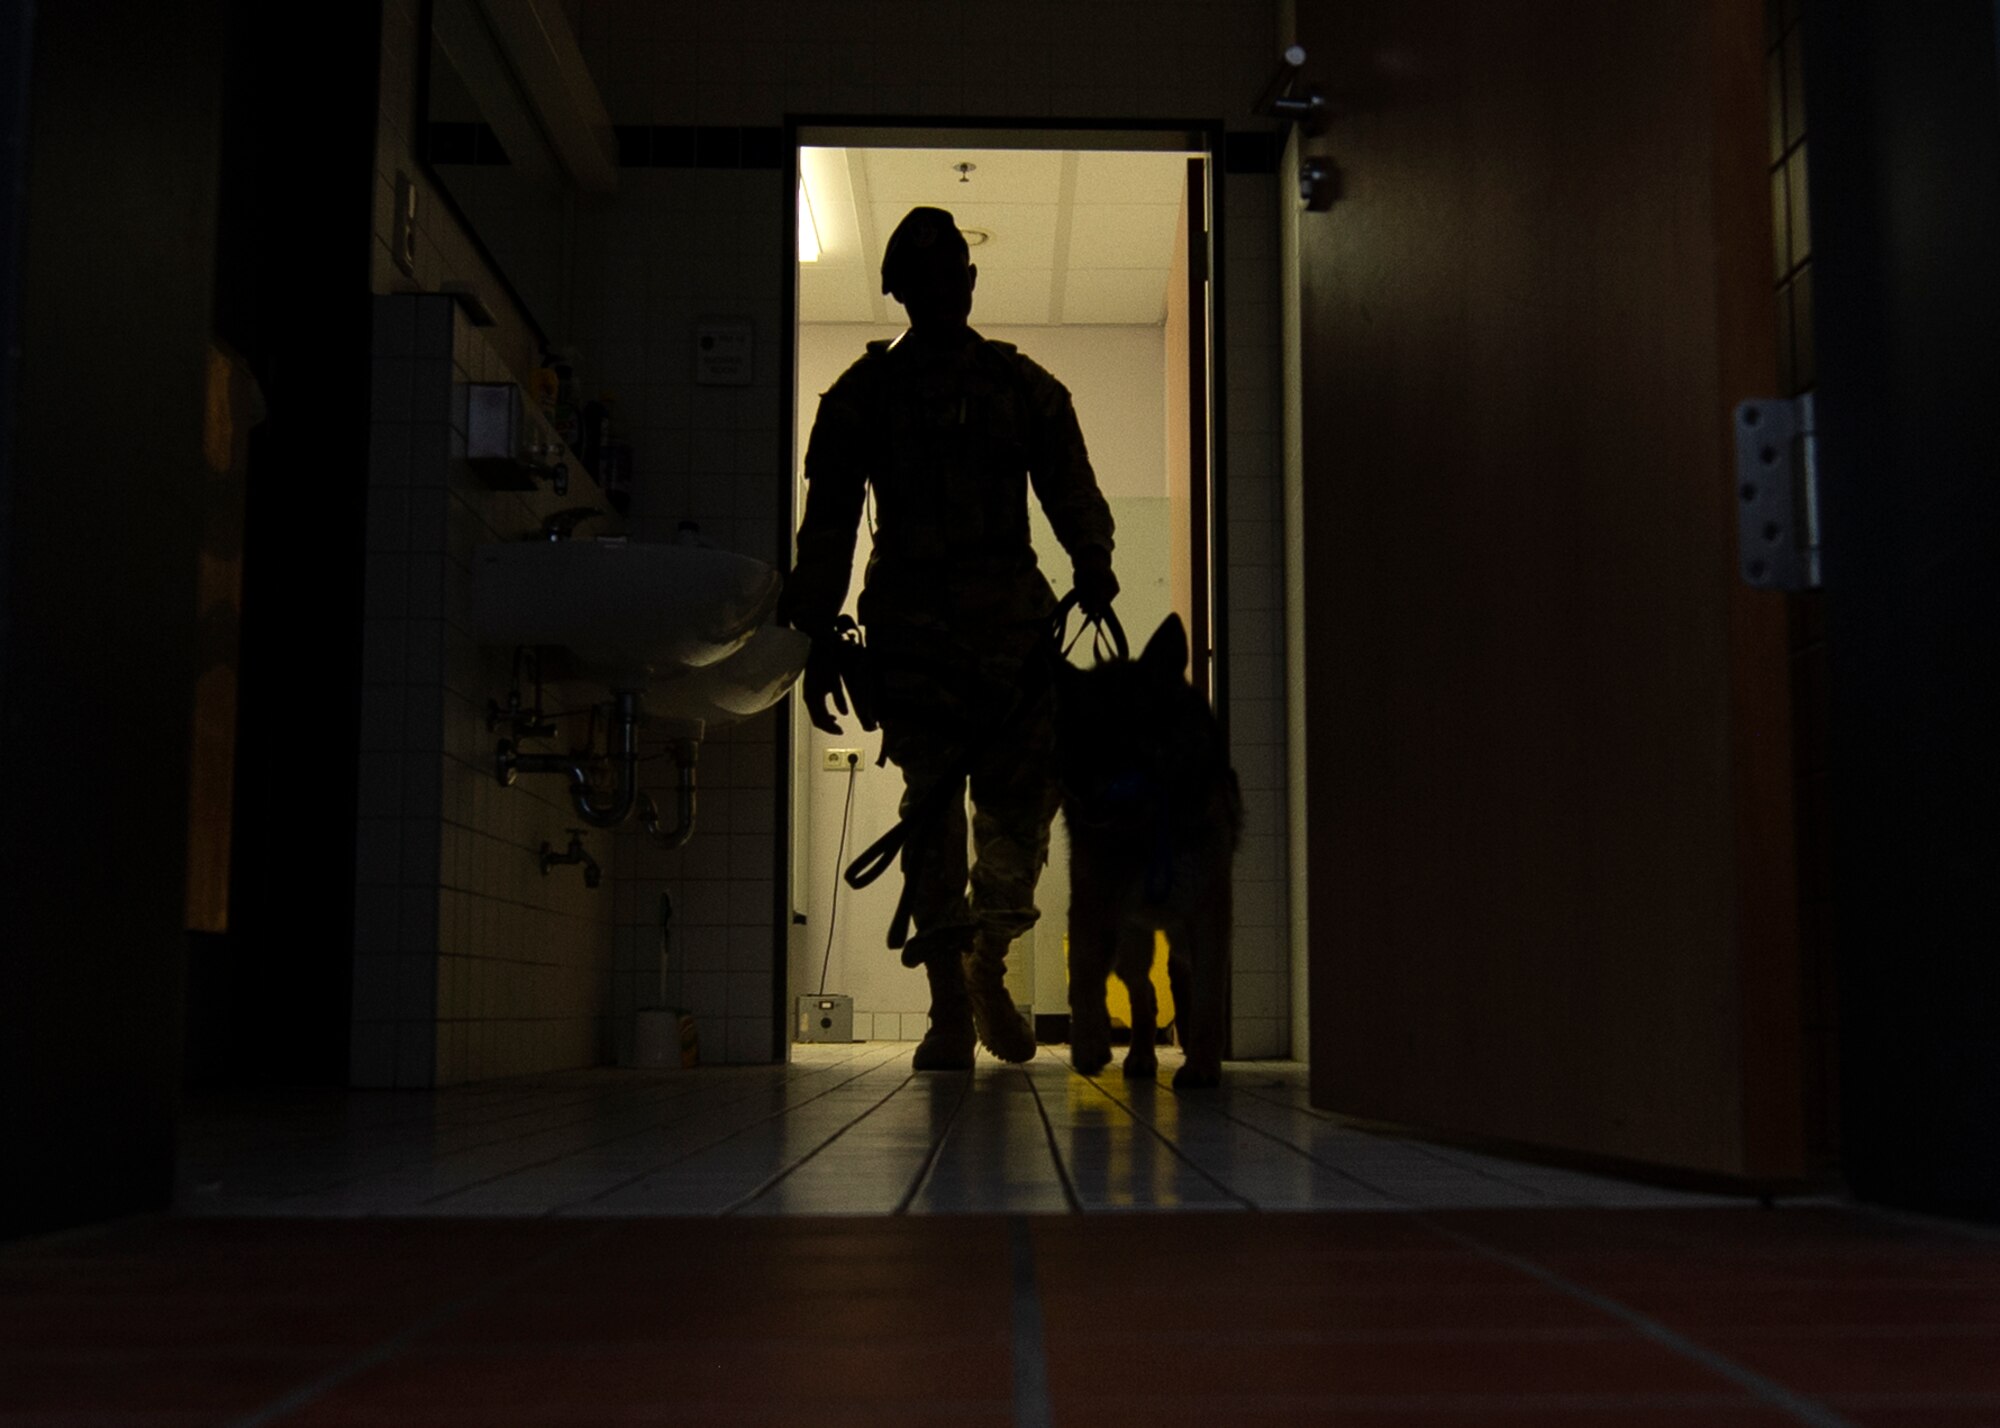 U.S. Air Force Senior Airman Victor Henderson, 52nd Security Forces Squadron military working dog handler, and Bora, an MWD, conduct detection training at Spangdahlem Air Base, Germany, Aug. 1, 2019. Henderson and Bora worked together to search for improvised explosive devices, weapons, and drugs. (U.S. Air Force photo by Airman 1st Class Valerie Seelye)